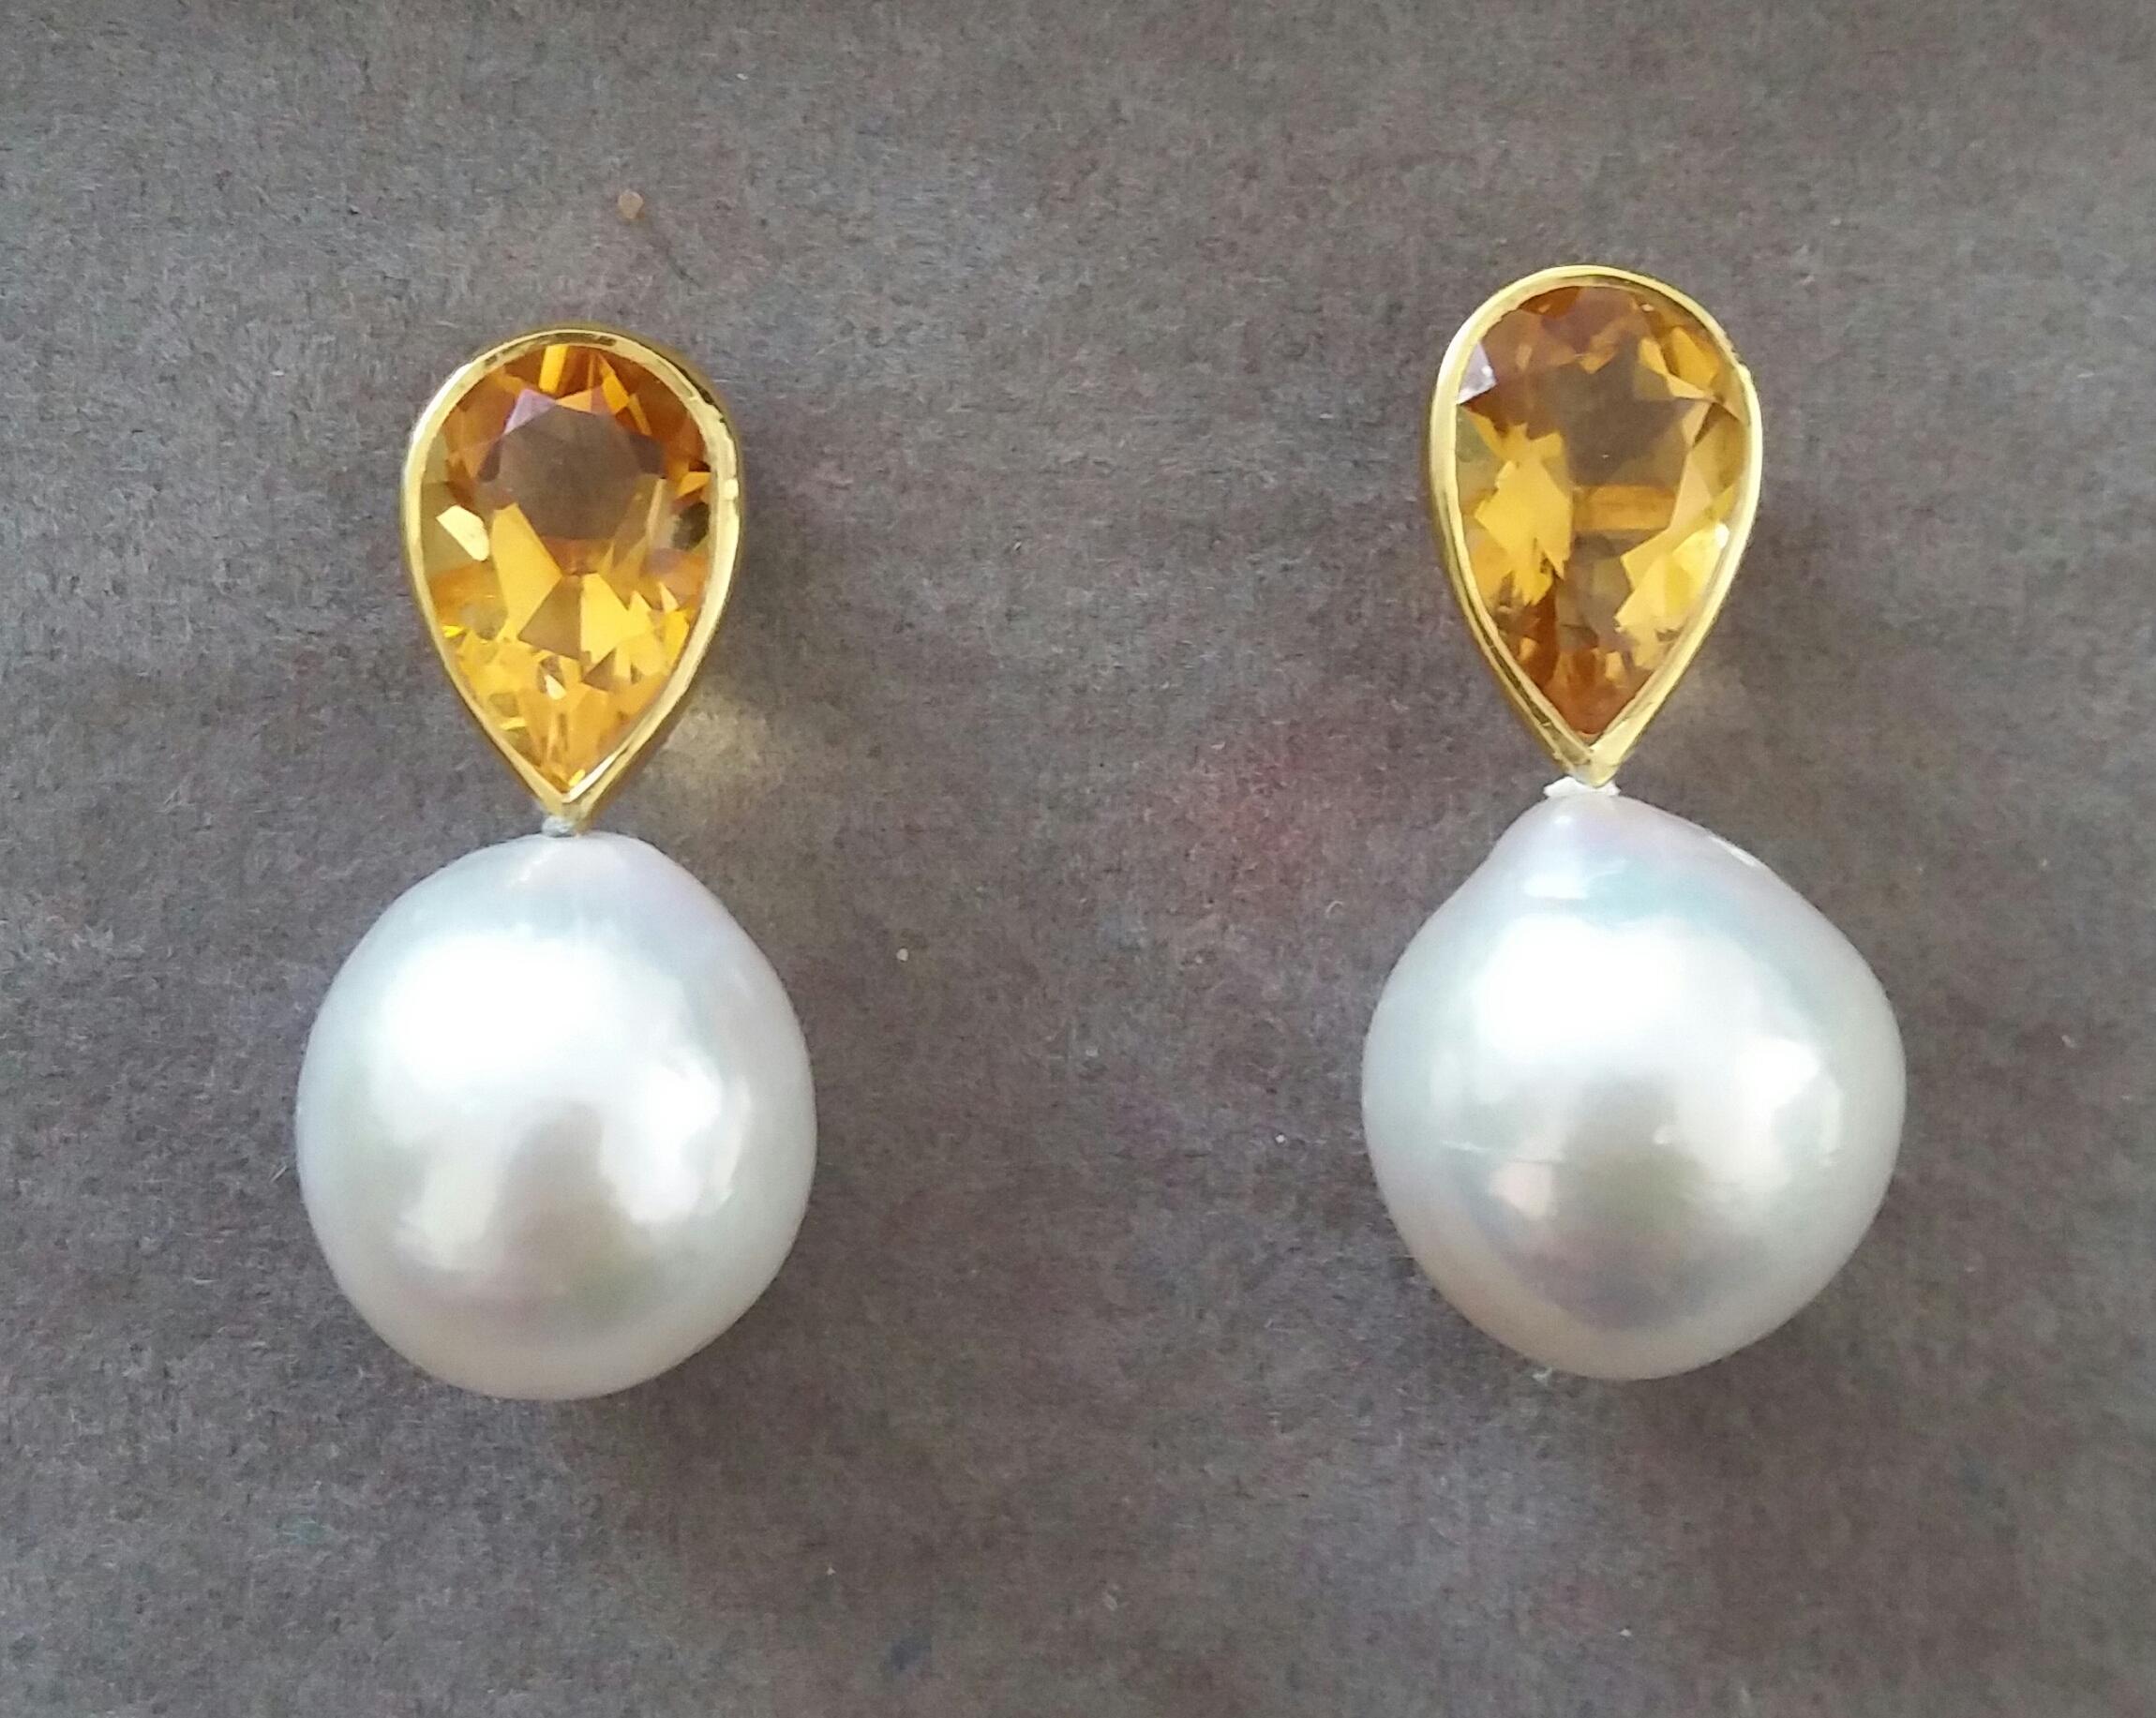 These simple but elegant and completely handmade earrings have 2 Pear Shape Faceted  Natural Citrines measuring 7 x 12 mm set in 14 Kt yellow gold bezel at the top to which are suspended 2 White Color Baroque Pearls  measuring 14 x 15 mm 

In 1978